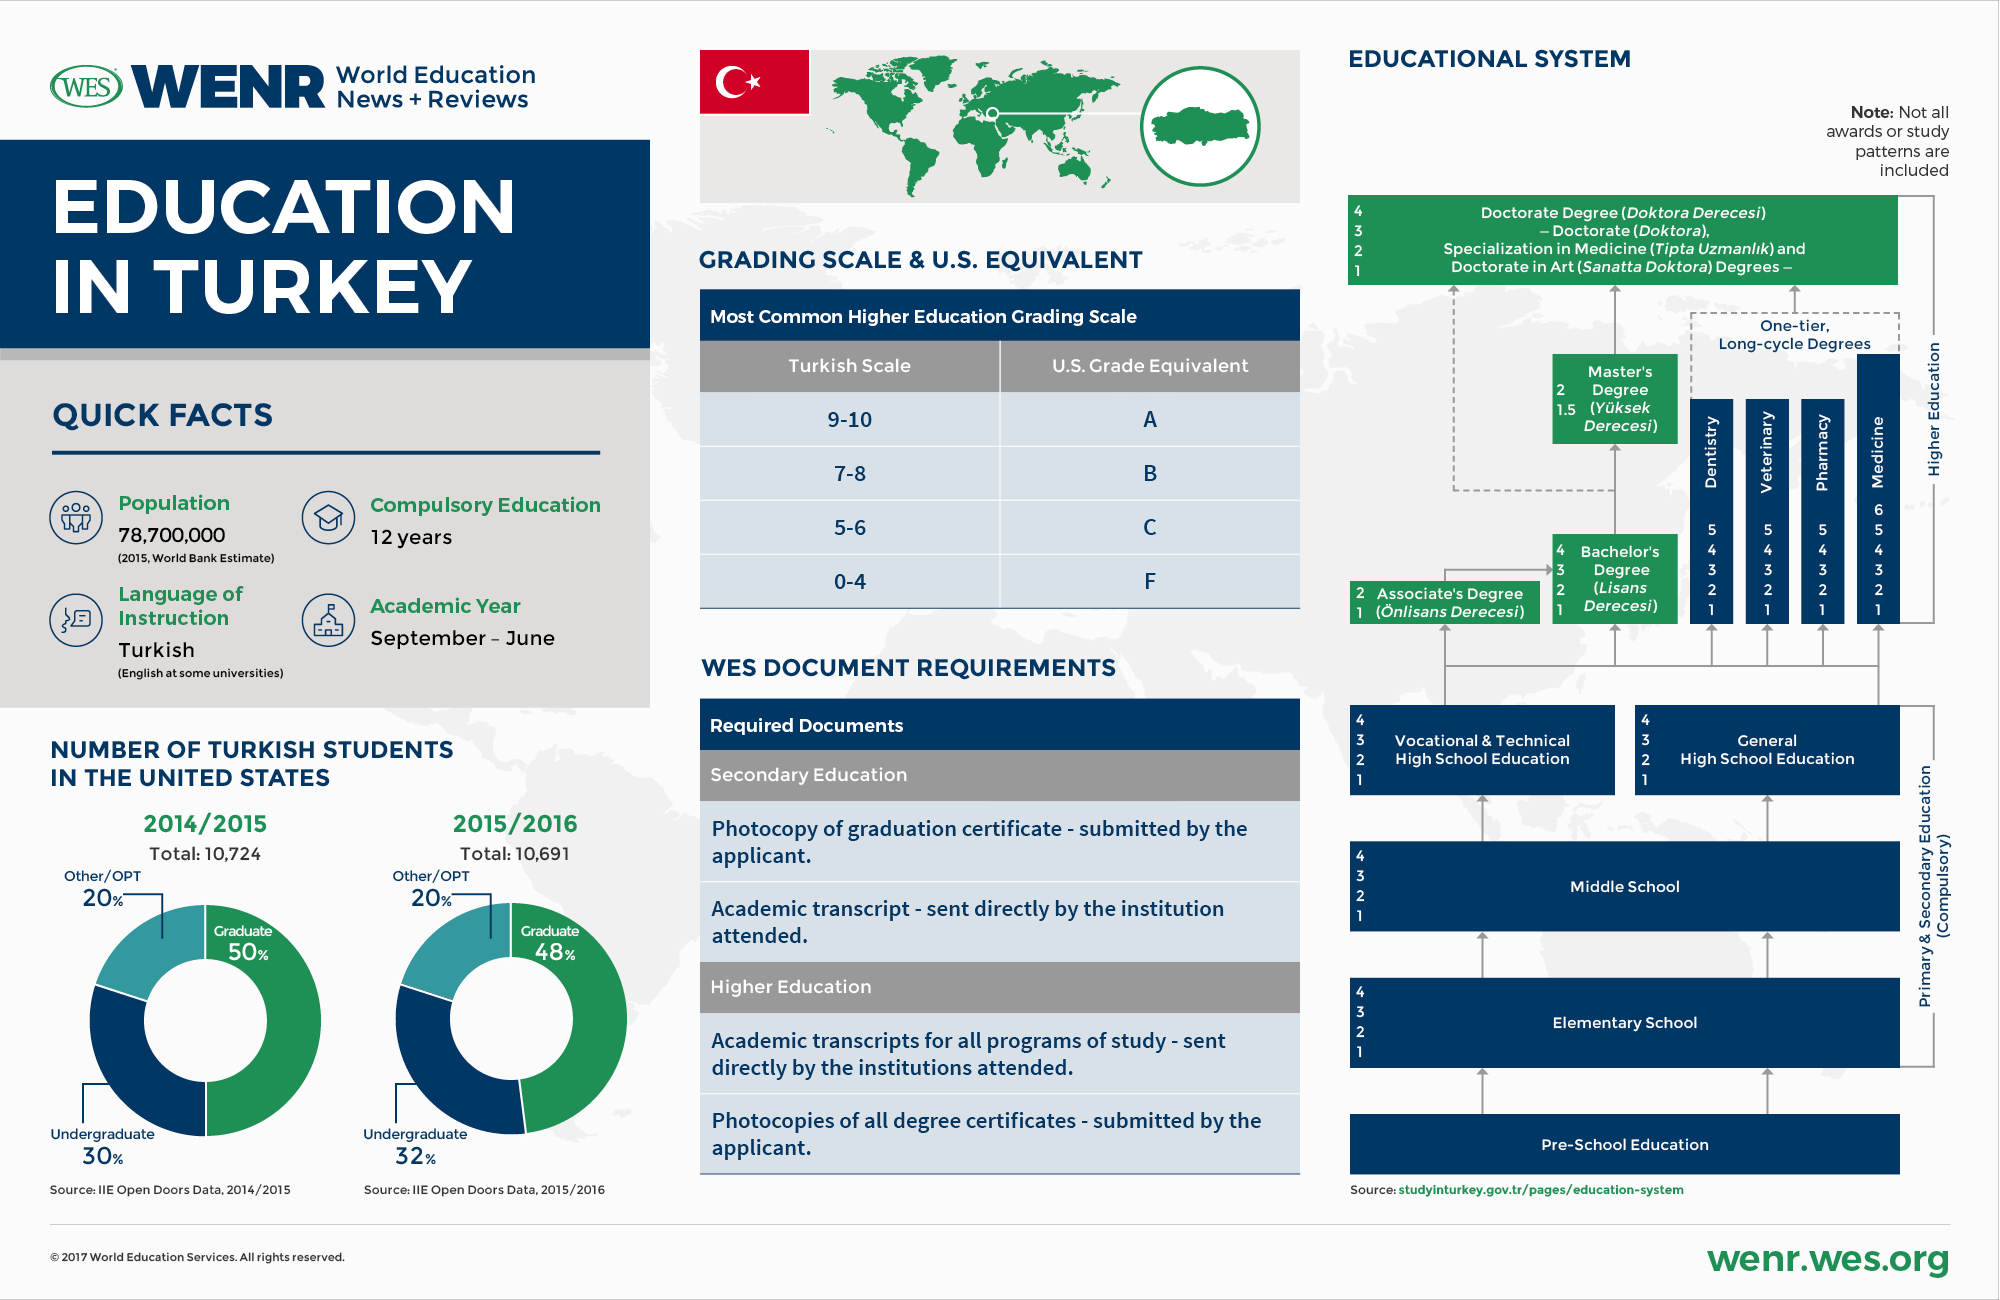 An infographic with fast facts about Turkey's educational system and international student mobility landscape. 